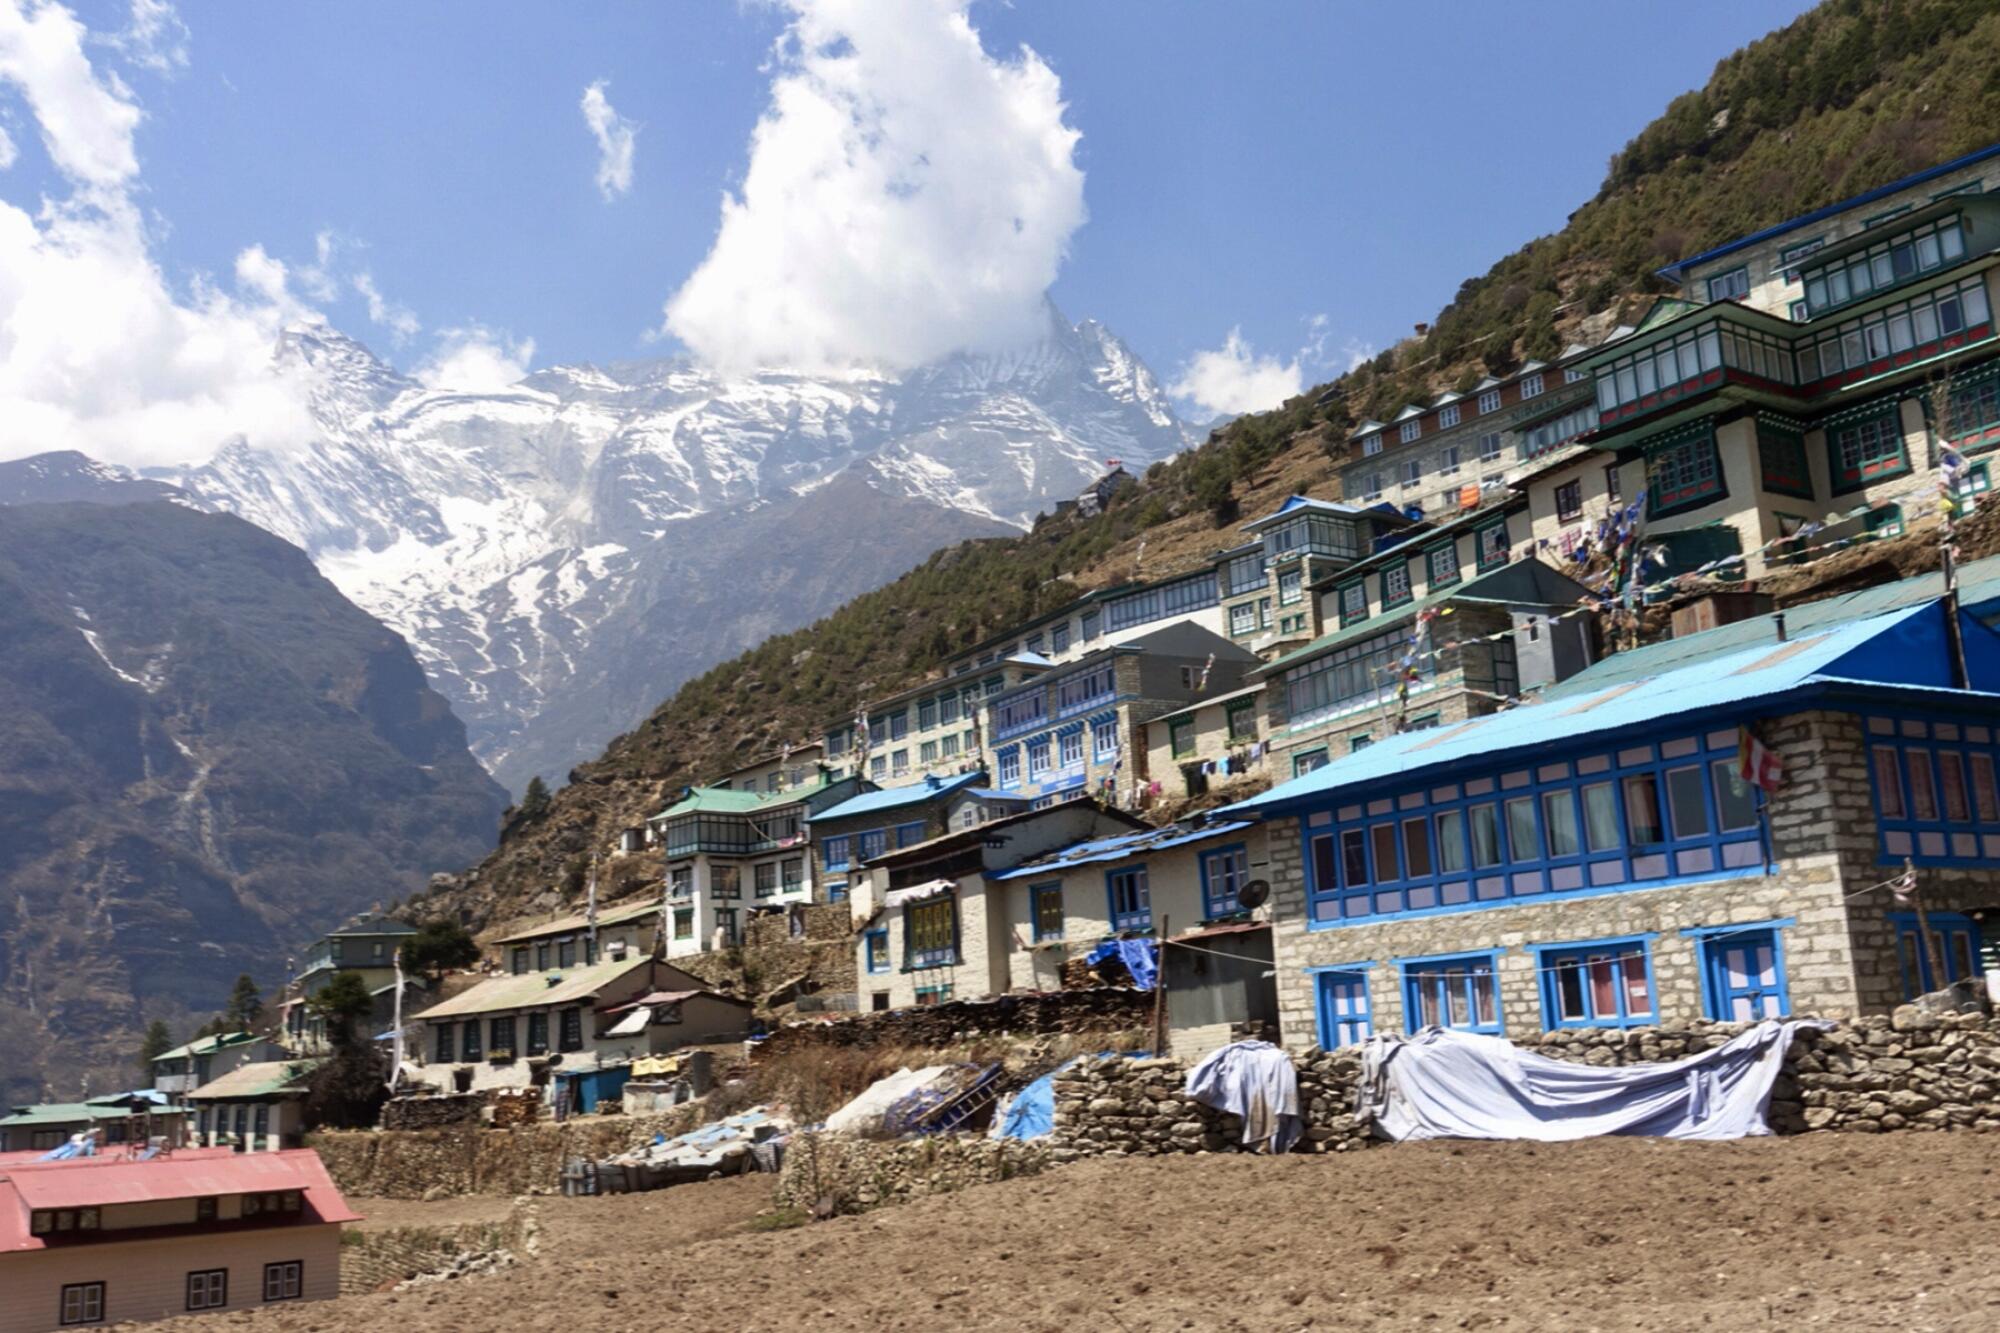 Modest buildings along a mountainside in the Himalayas